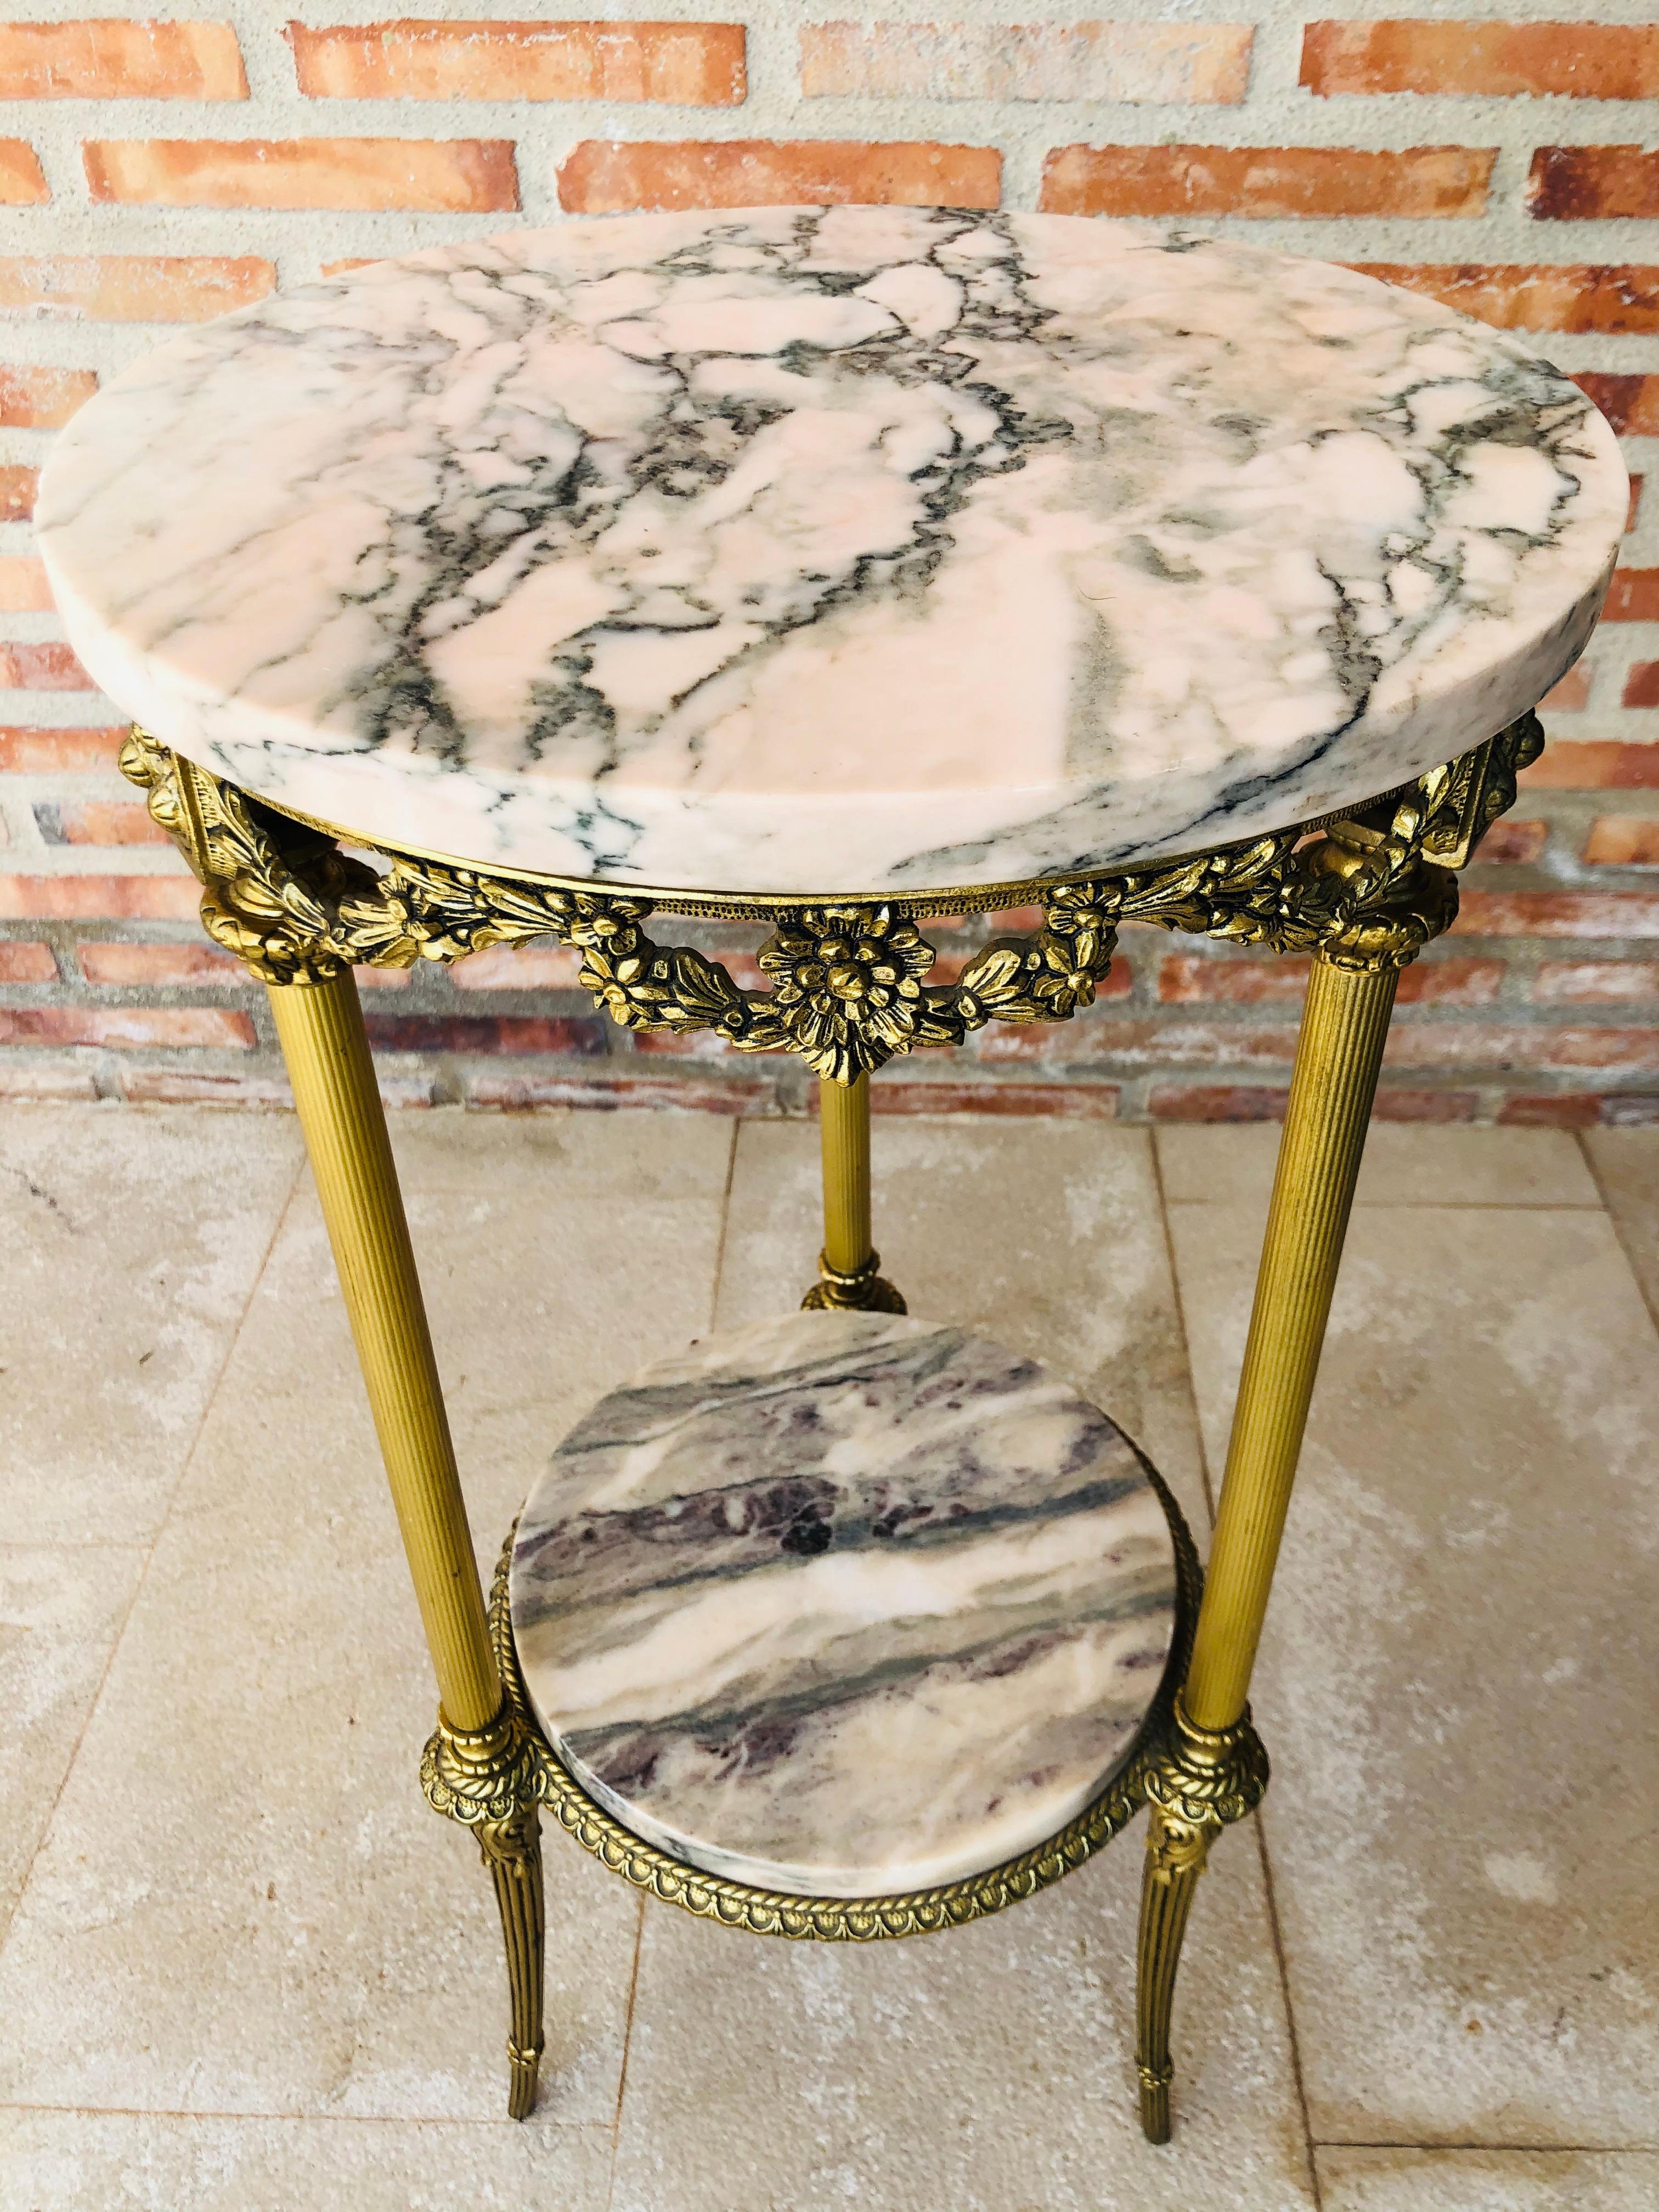 French Provincial 19th Century Spanish Bronze and Brass Gilded Side Table with White Marbles Top For Sale